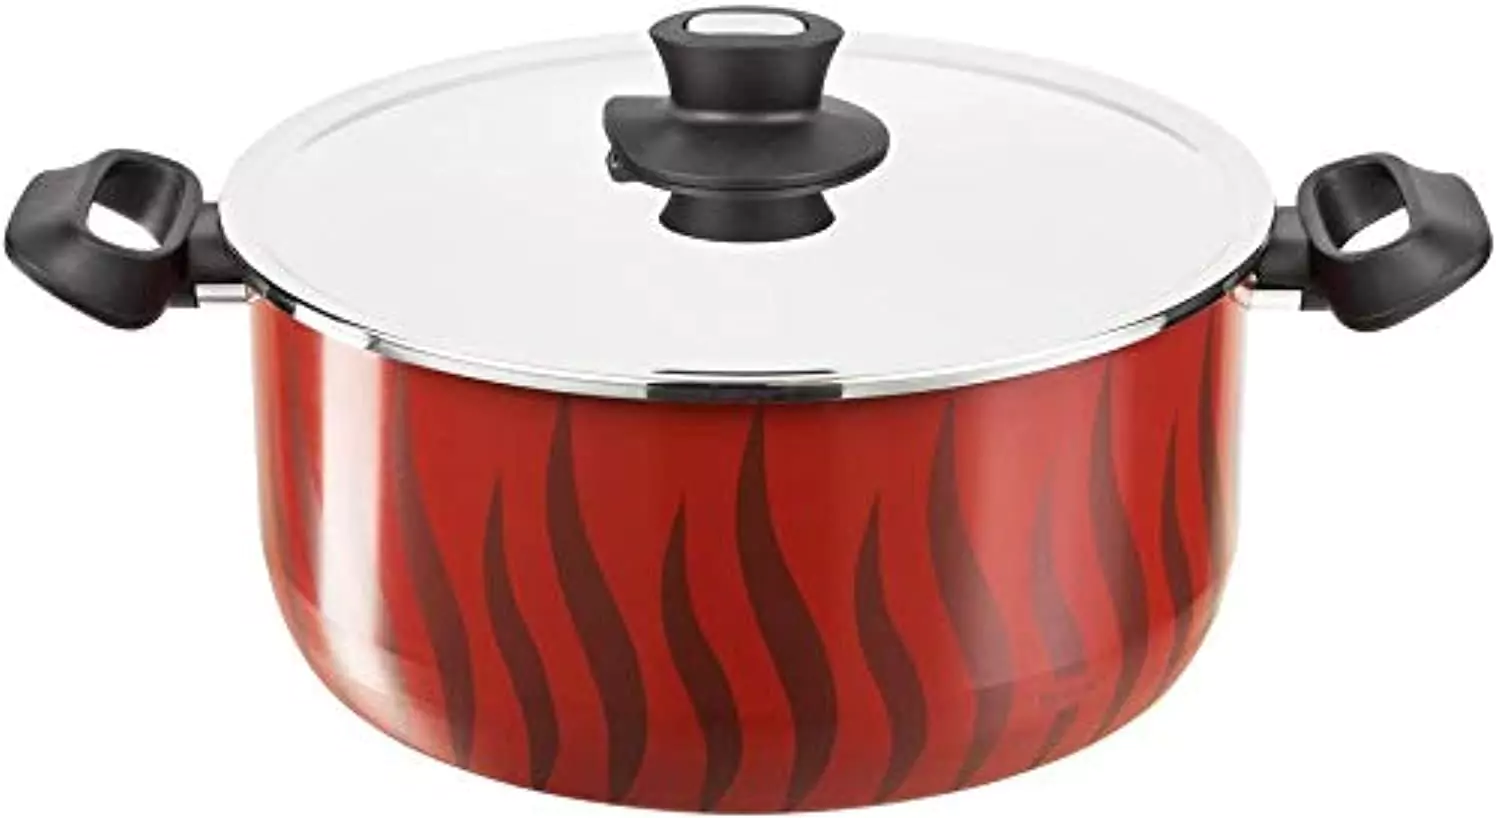 Tefal Cookware Size 22 + Lid, Red - C5484582